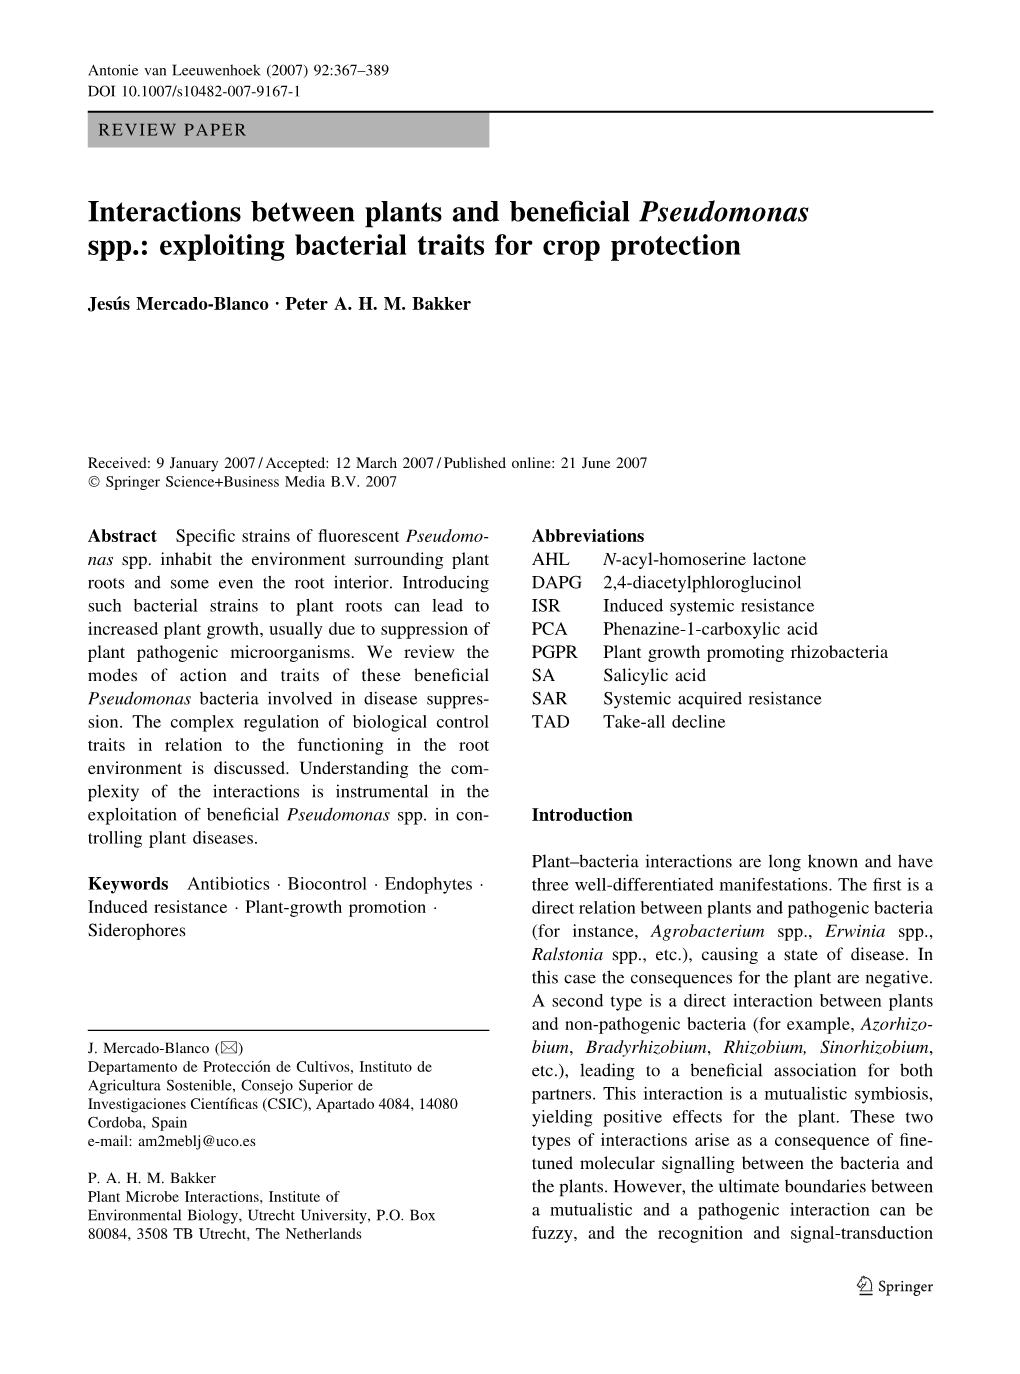 Interactions Between Plants and Beneficial Pseudomonas Spp